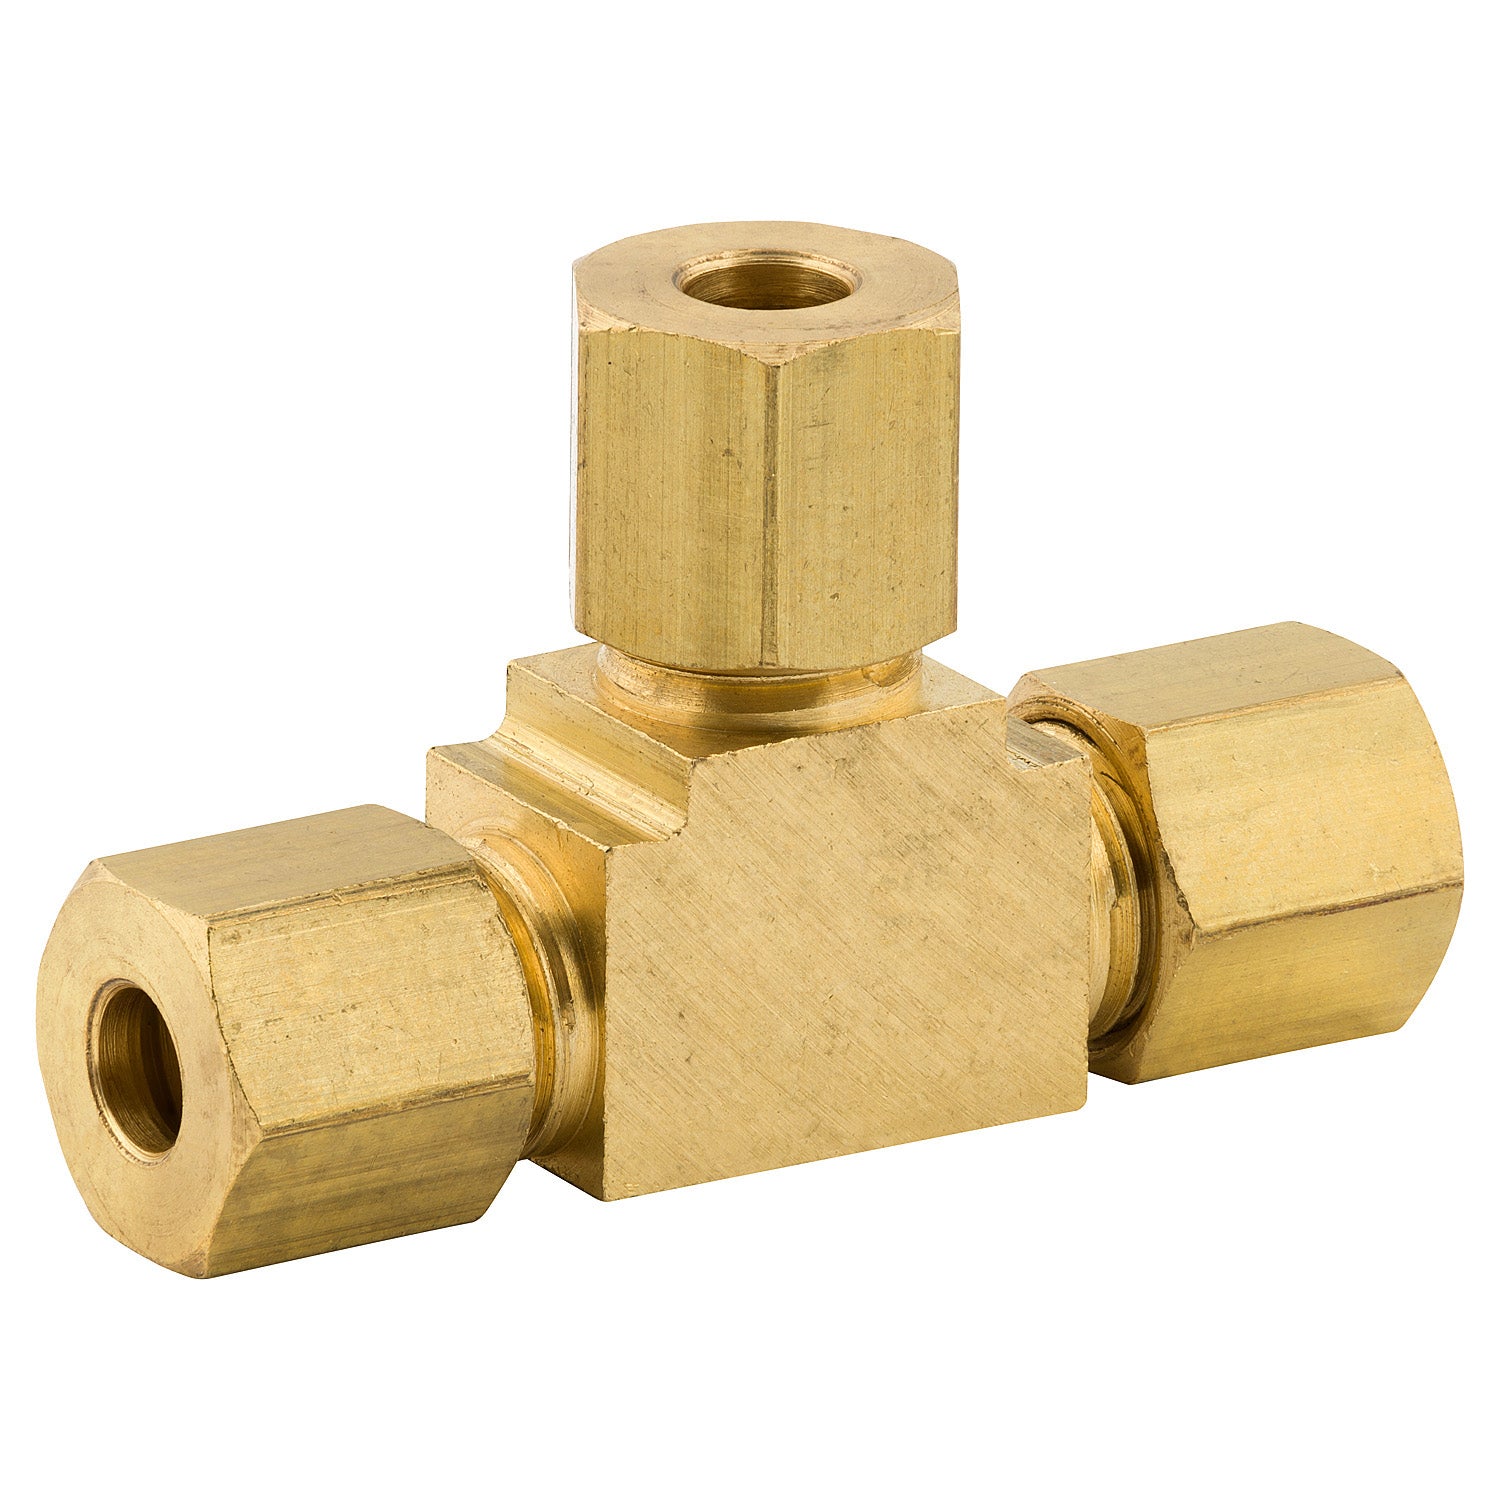 Union Tee Compression, Brass, 3/16, Bag of 1 – AGS Company Automotive  Solutions